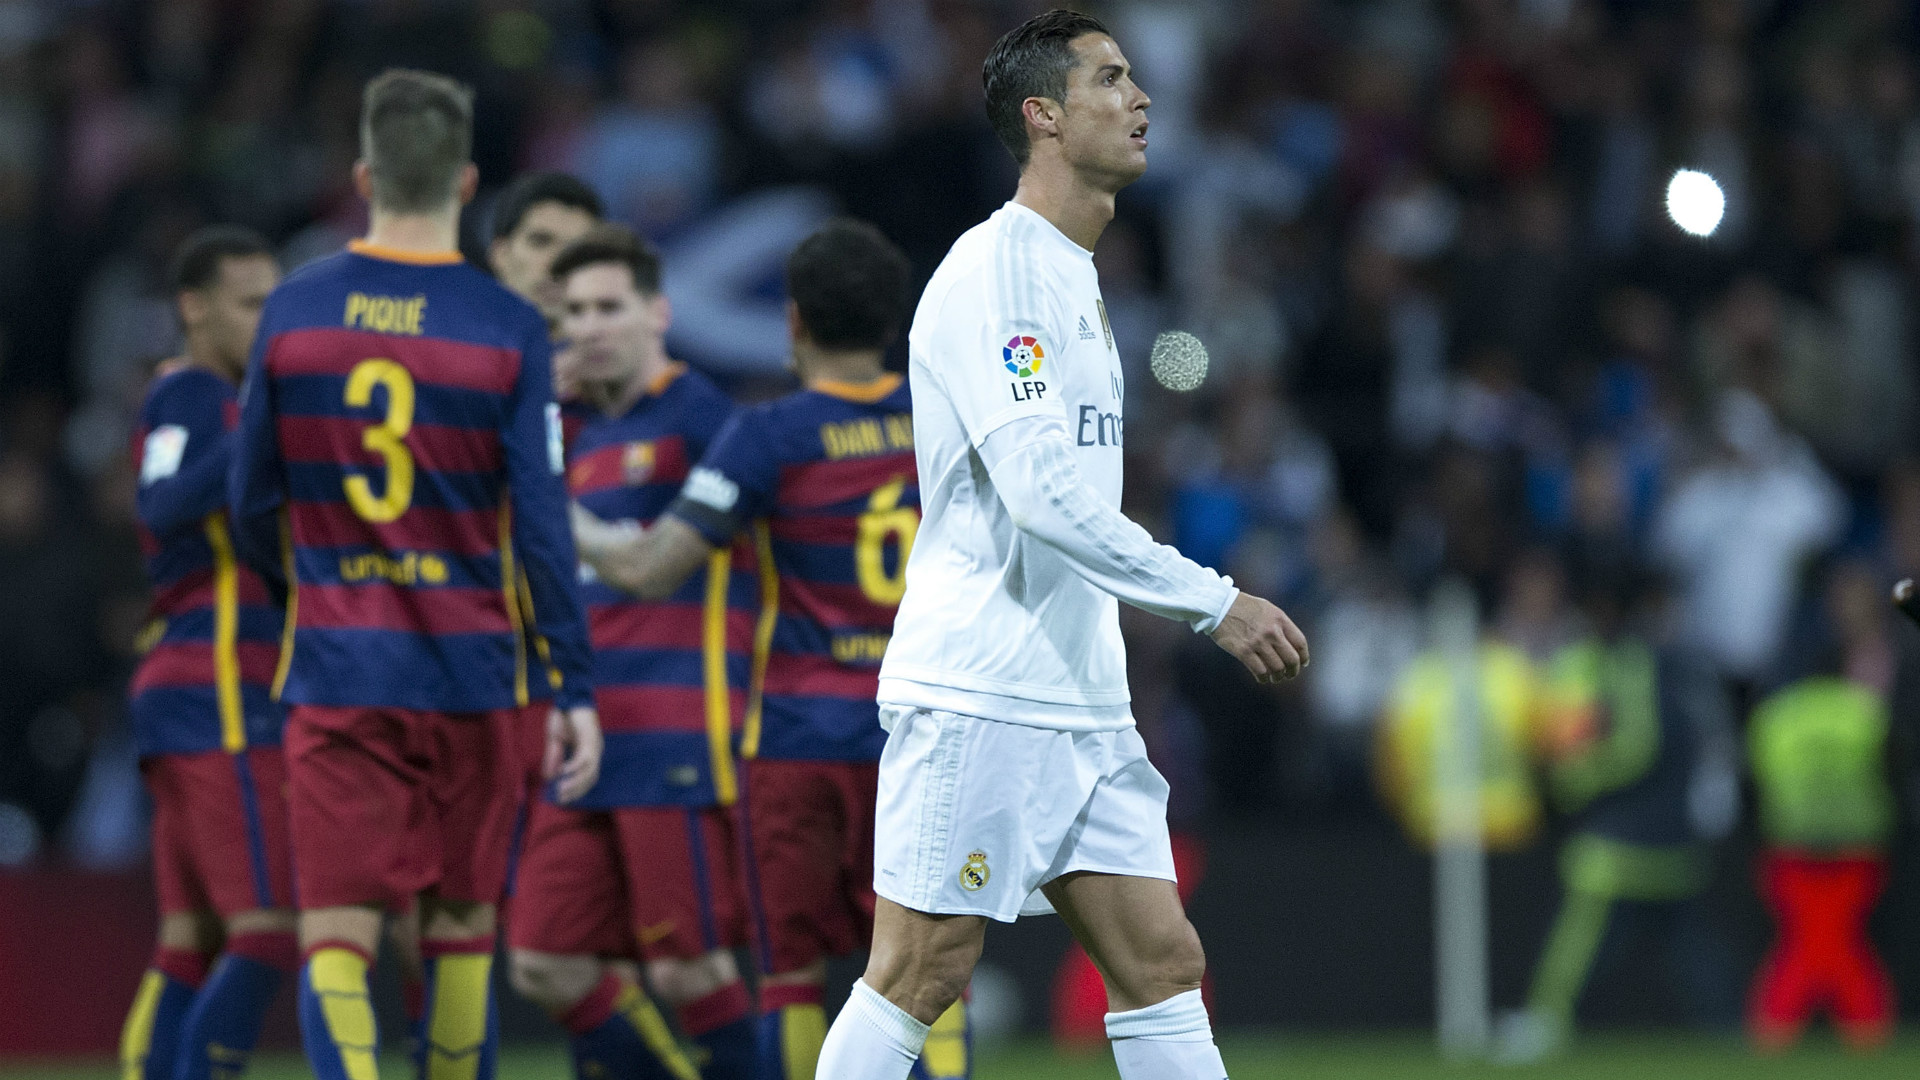 A legacy left behind: Lionel Messi, Cristiano Ronaldo and a battle